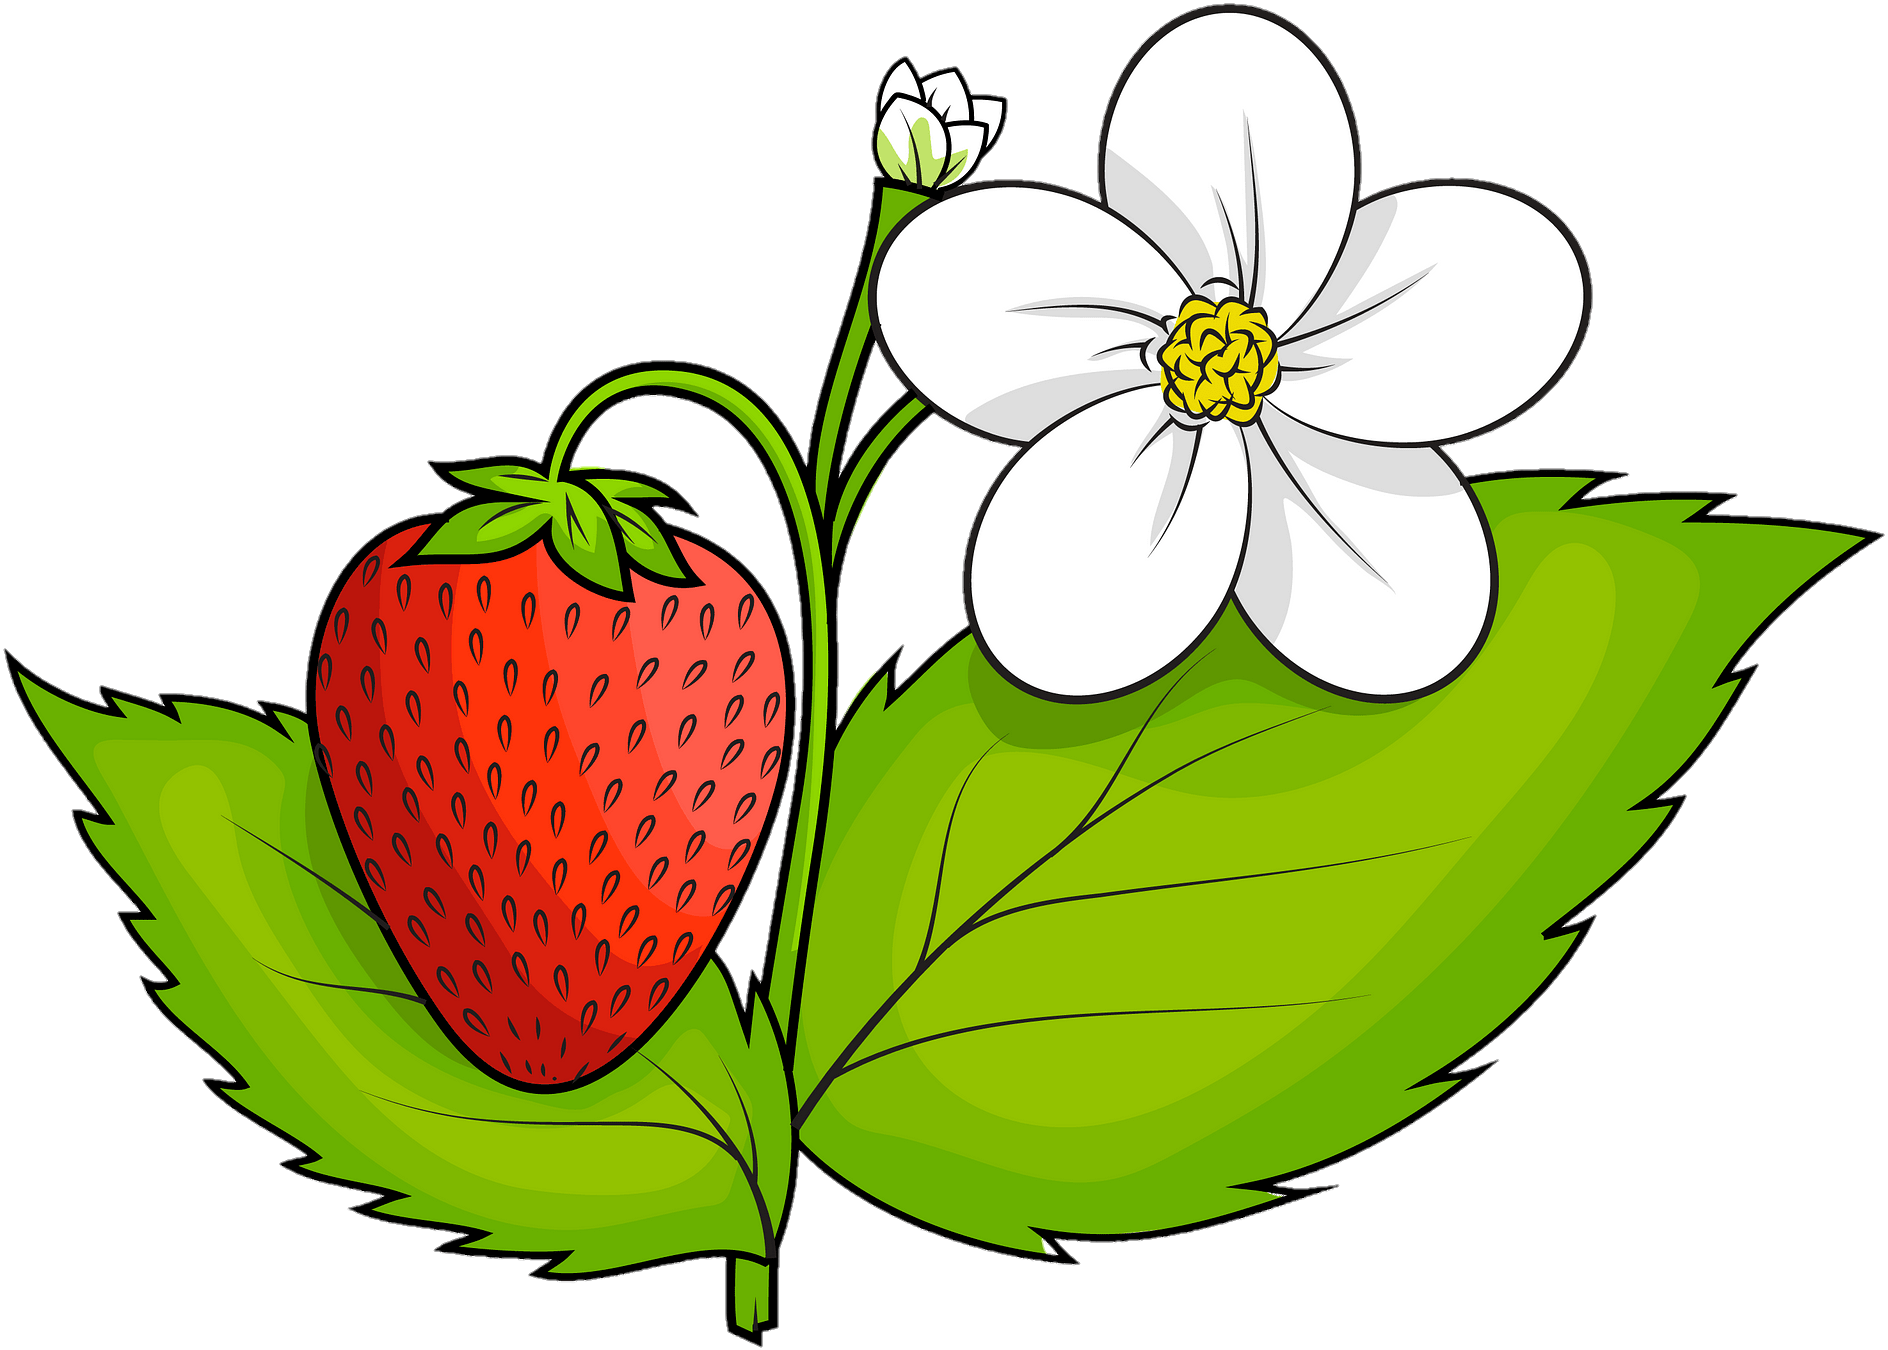 strawberry-png-image-from-pngfre-4